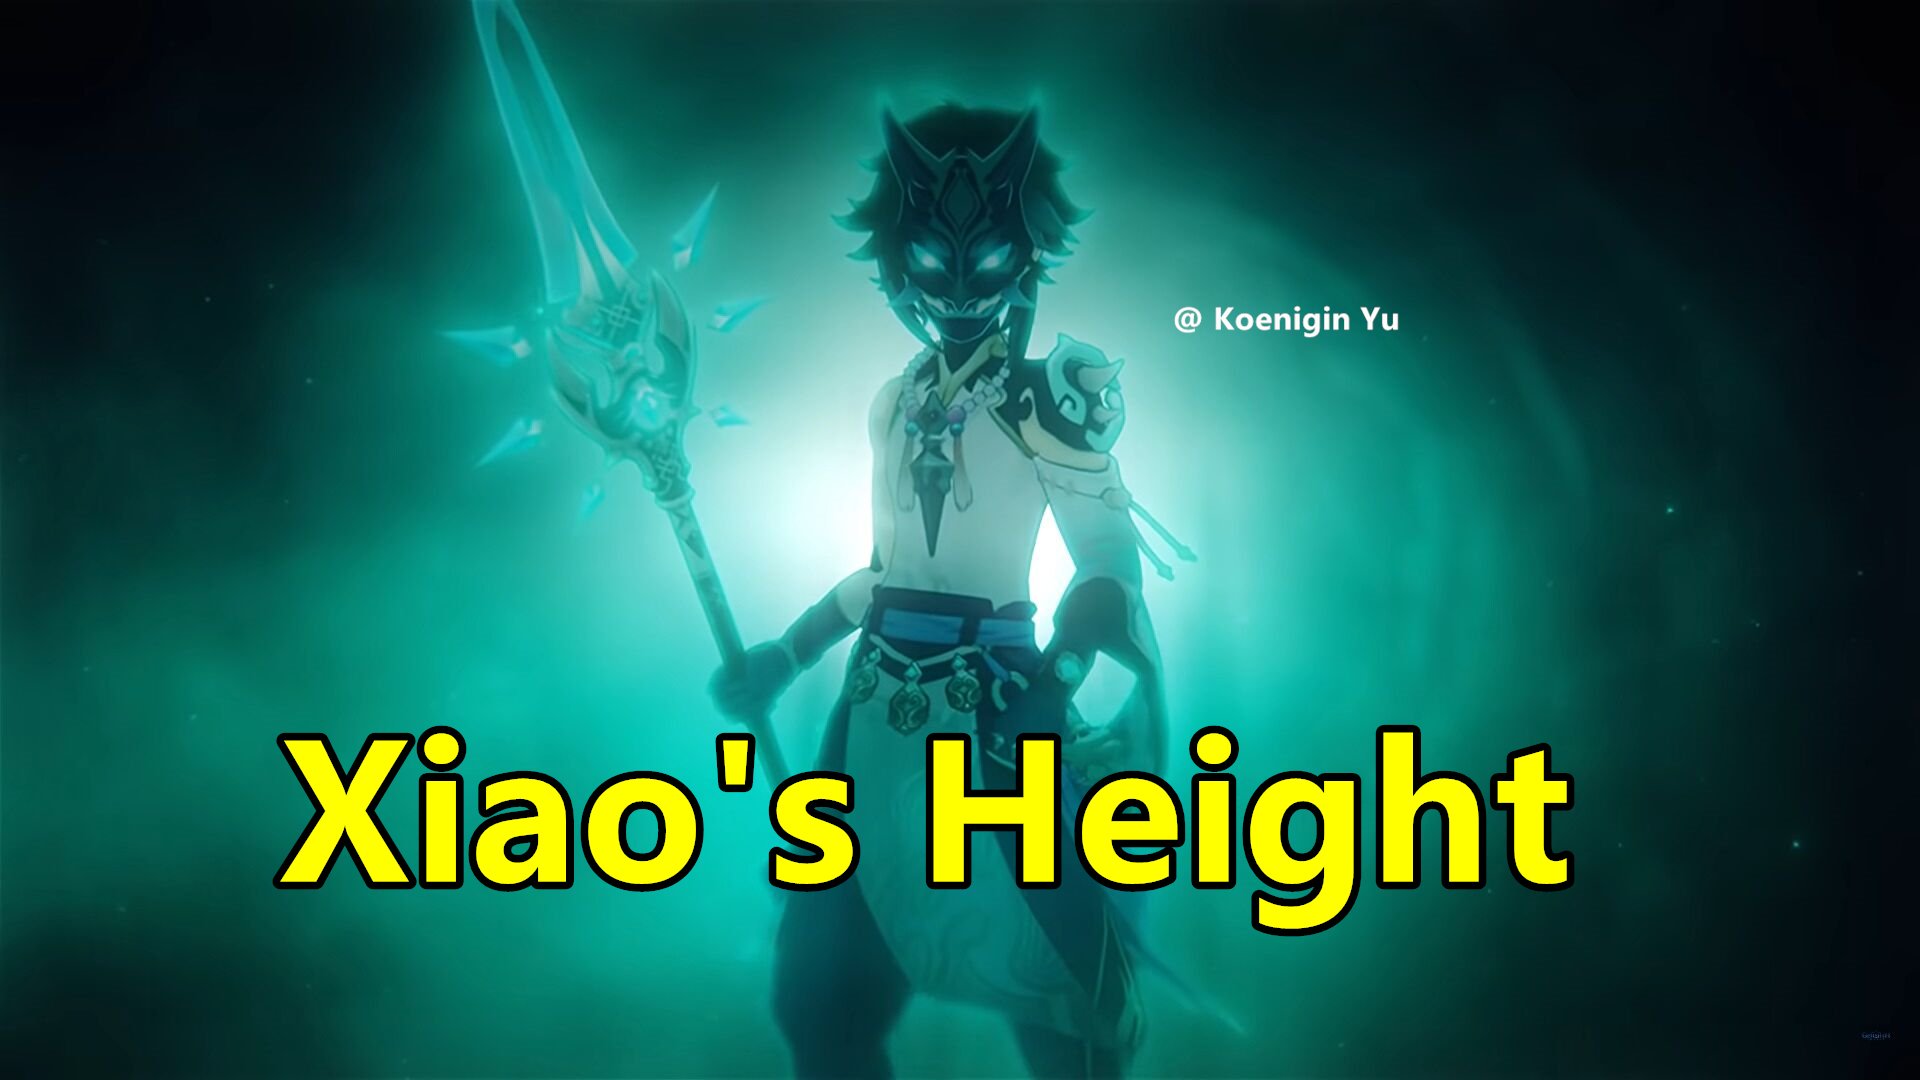 How Tall is Xiao? | Xiao's Height